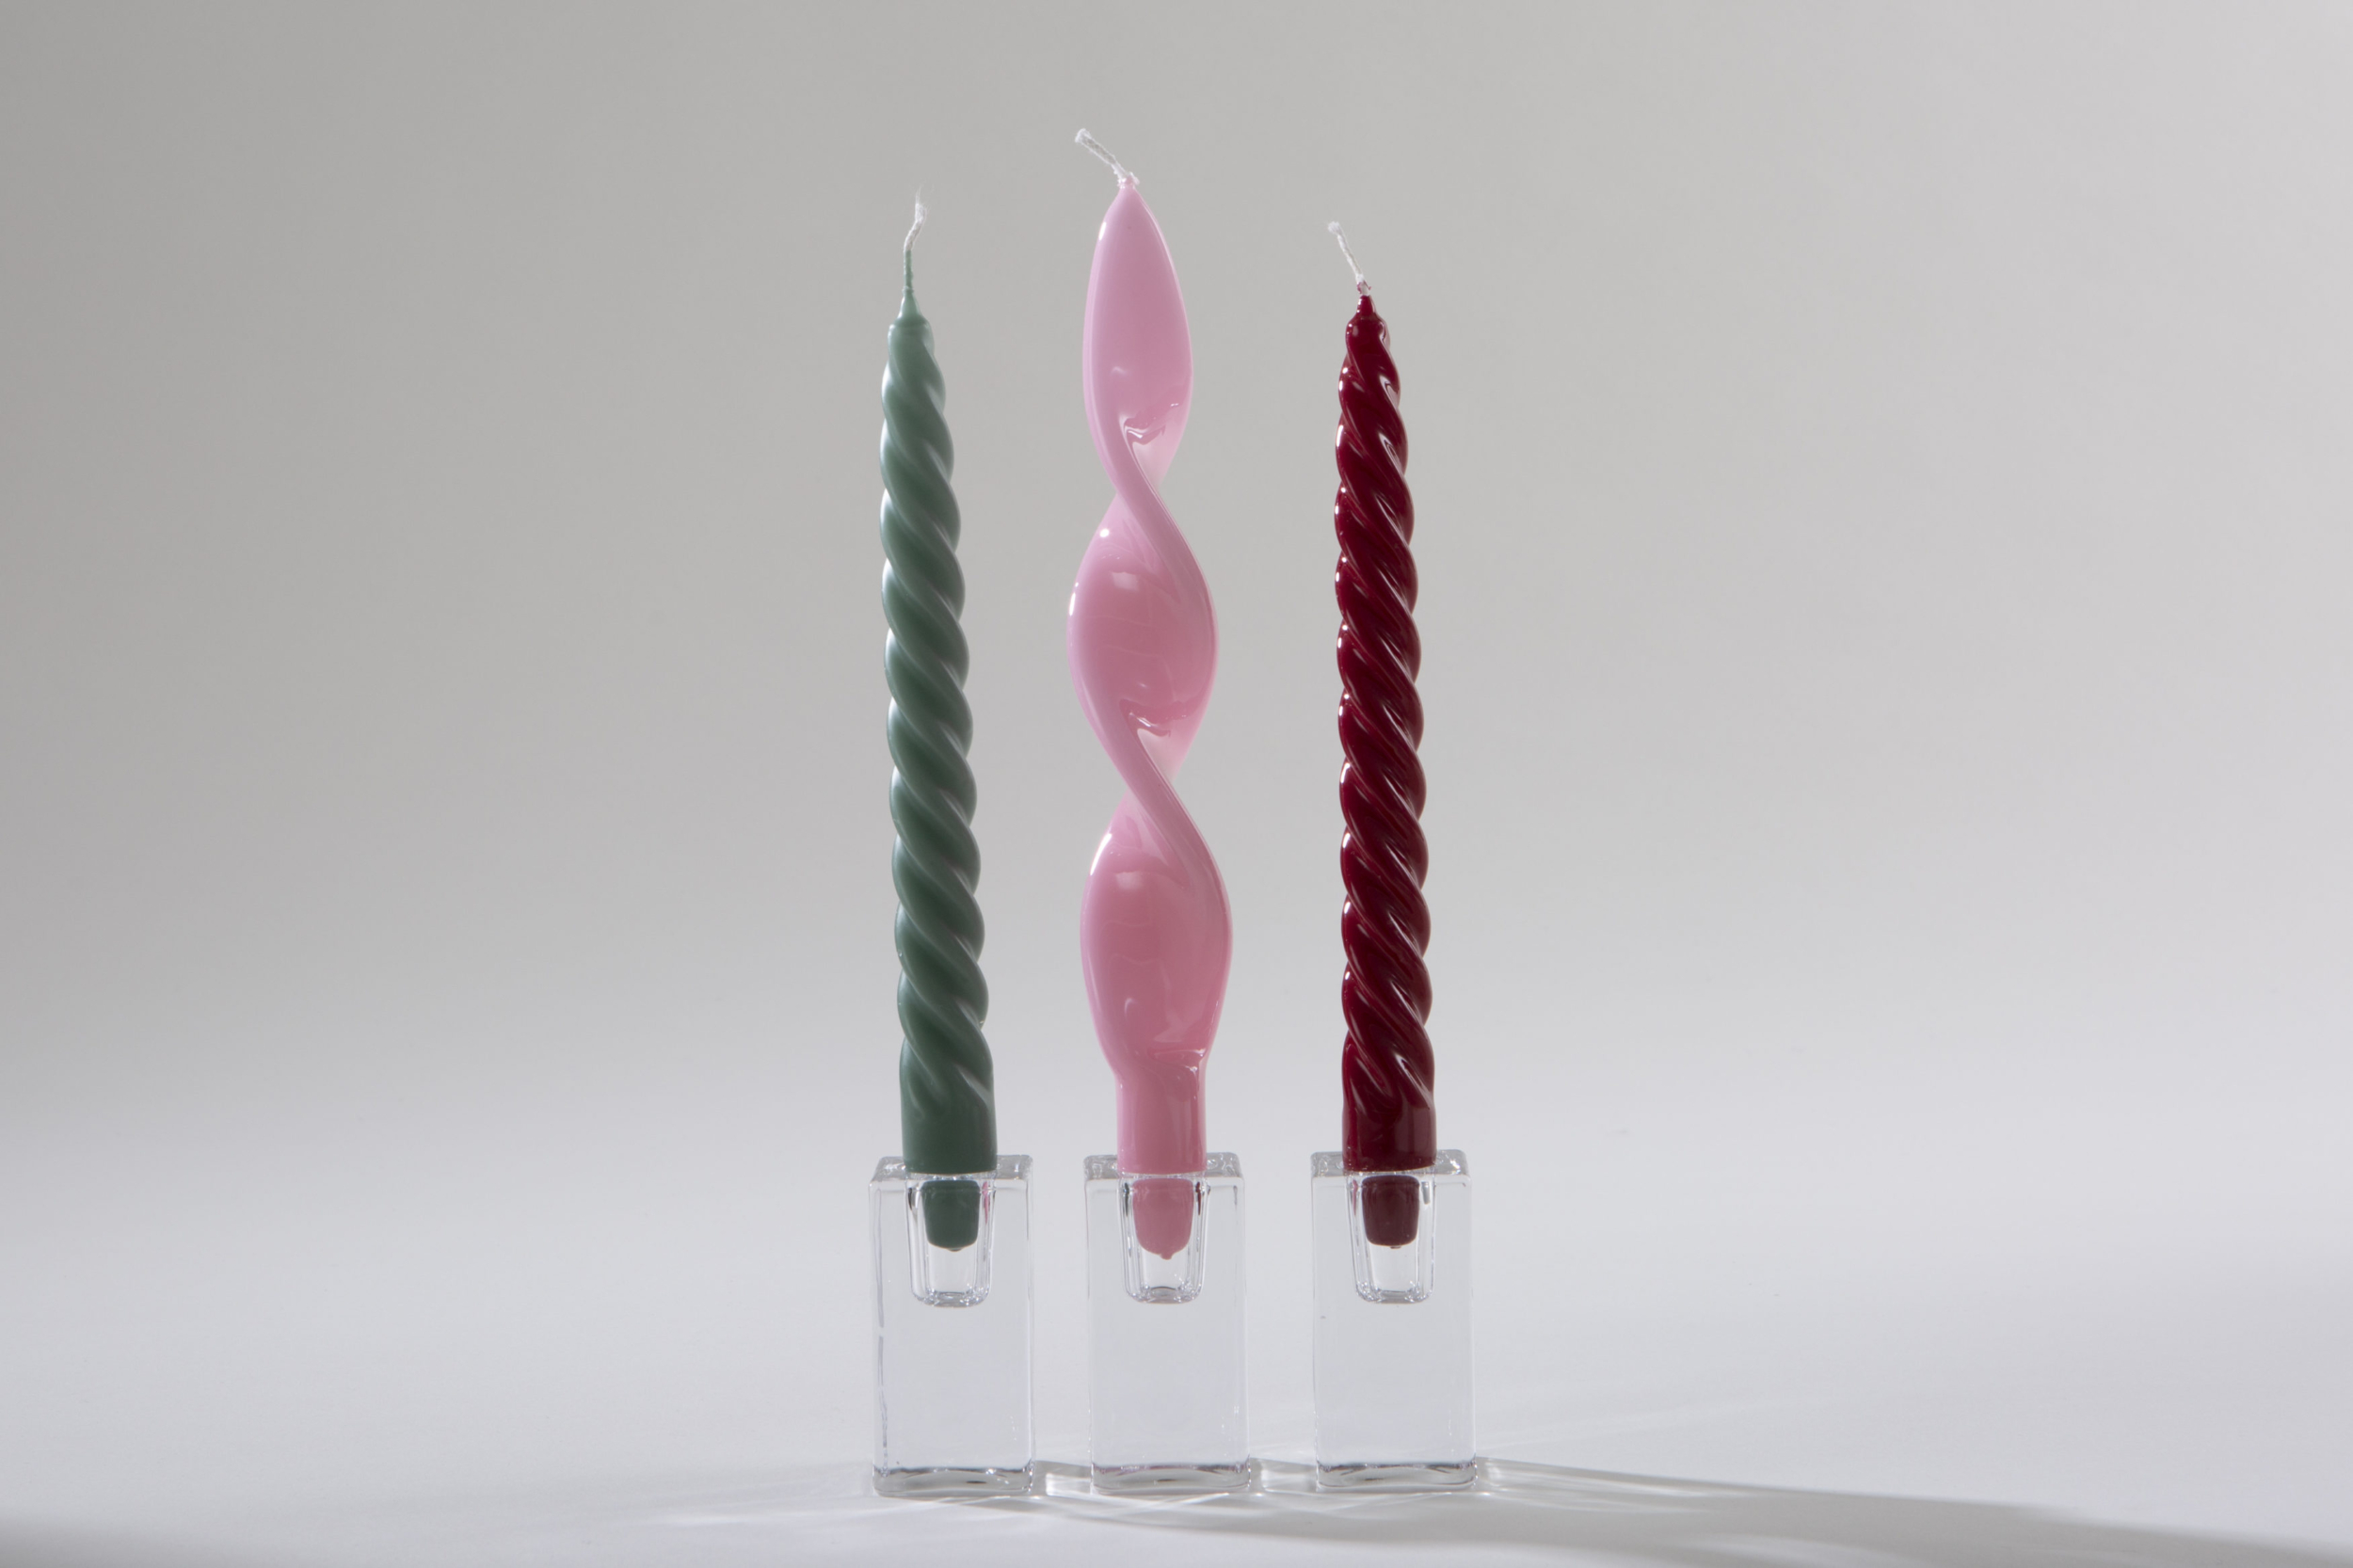  | This twisted candle in Glitz Bordeaux   attracts all eyes with its minimalist, twisted design. Somehow, it is more than just a candle, almost a small object of art that not only looks great on the table but also as an eye-catcher on sideboards or bar trolleys.Our spiral candles are carefully made by hand in a traditional manufactory in Italy.  The softly shaped candles look particularly good in our “Rivadavia” candle holders made of clear glass.We exclusively offer candles for sale, not for... | 